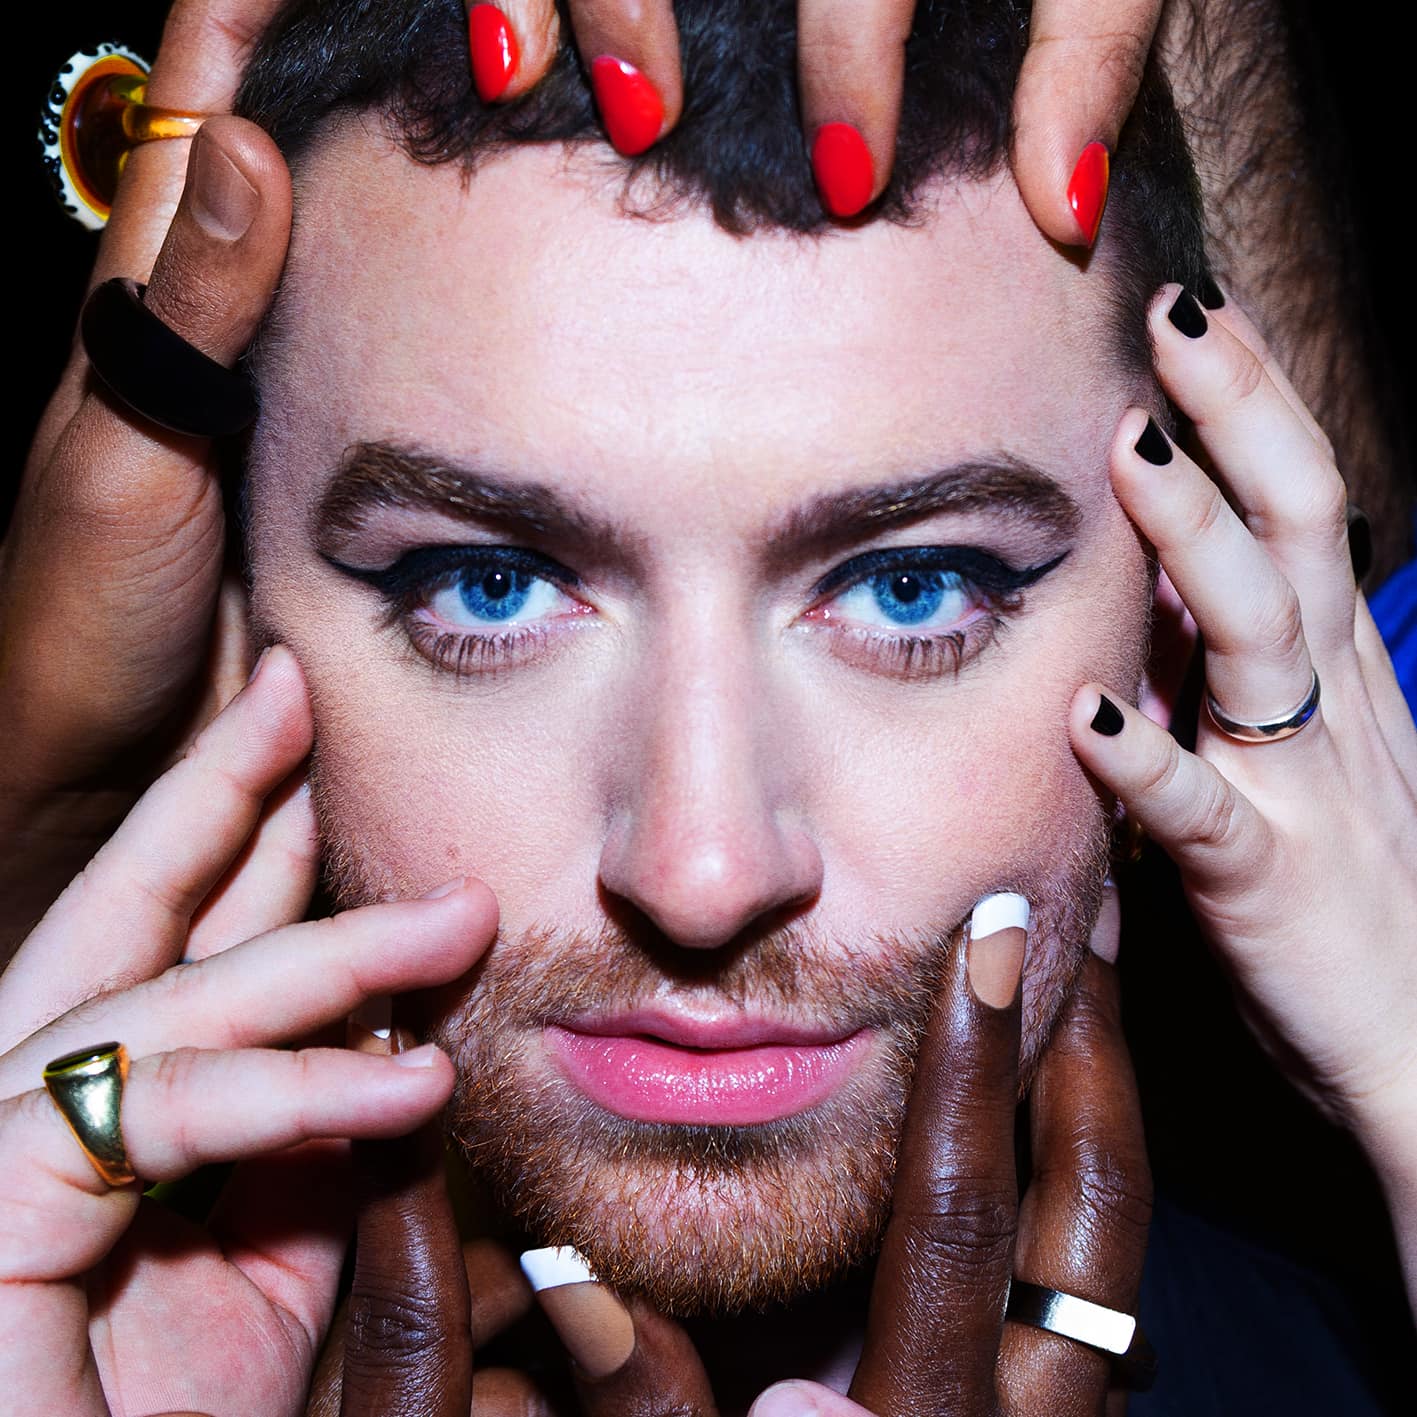 quotes from sam smith